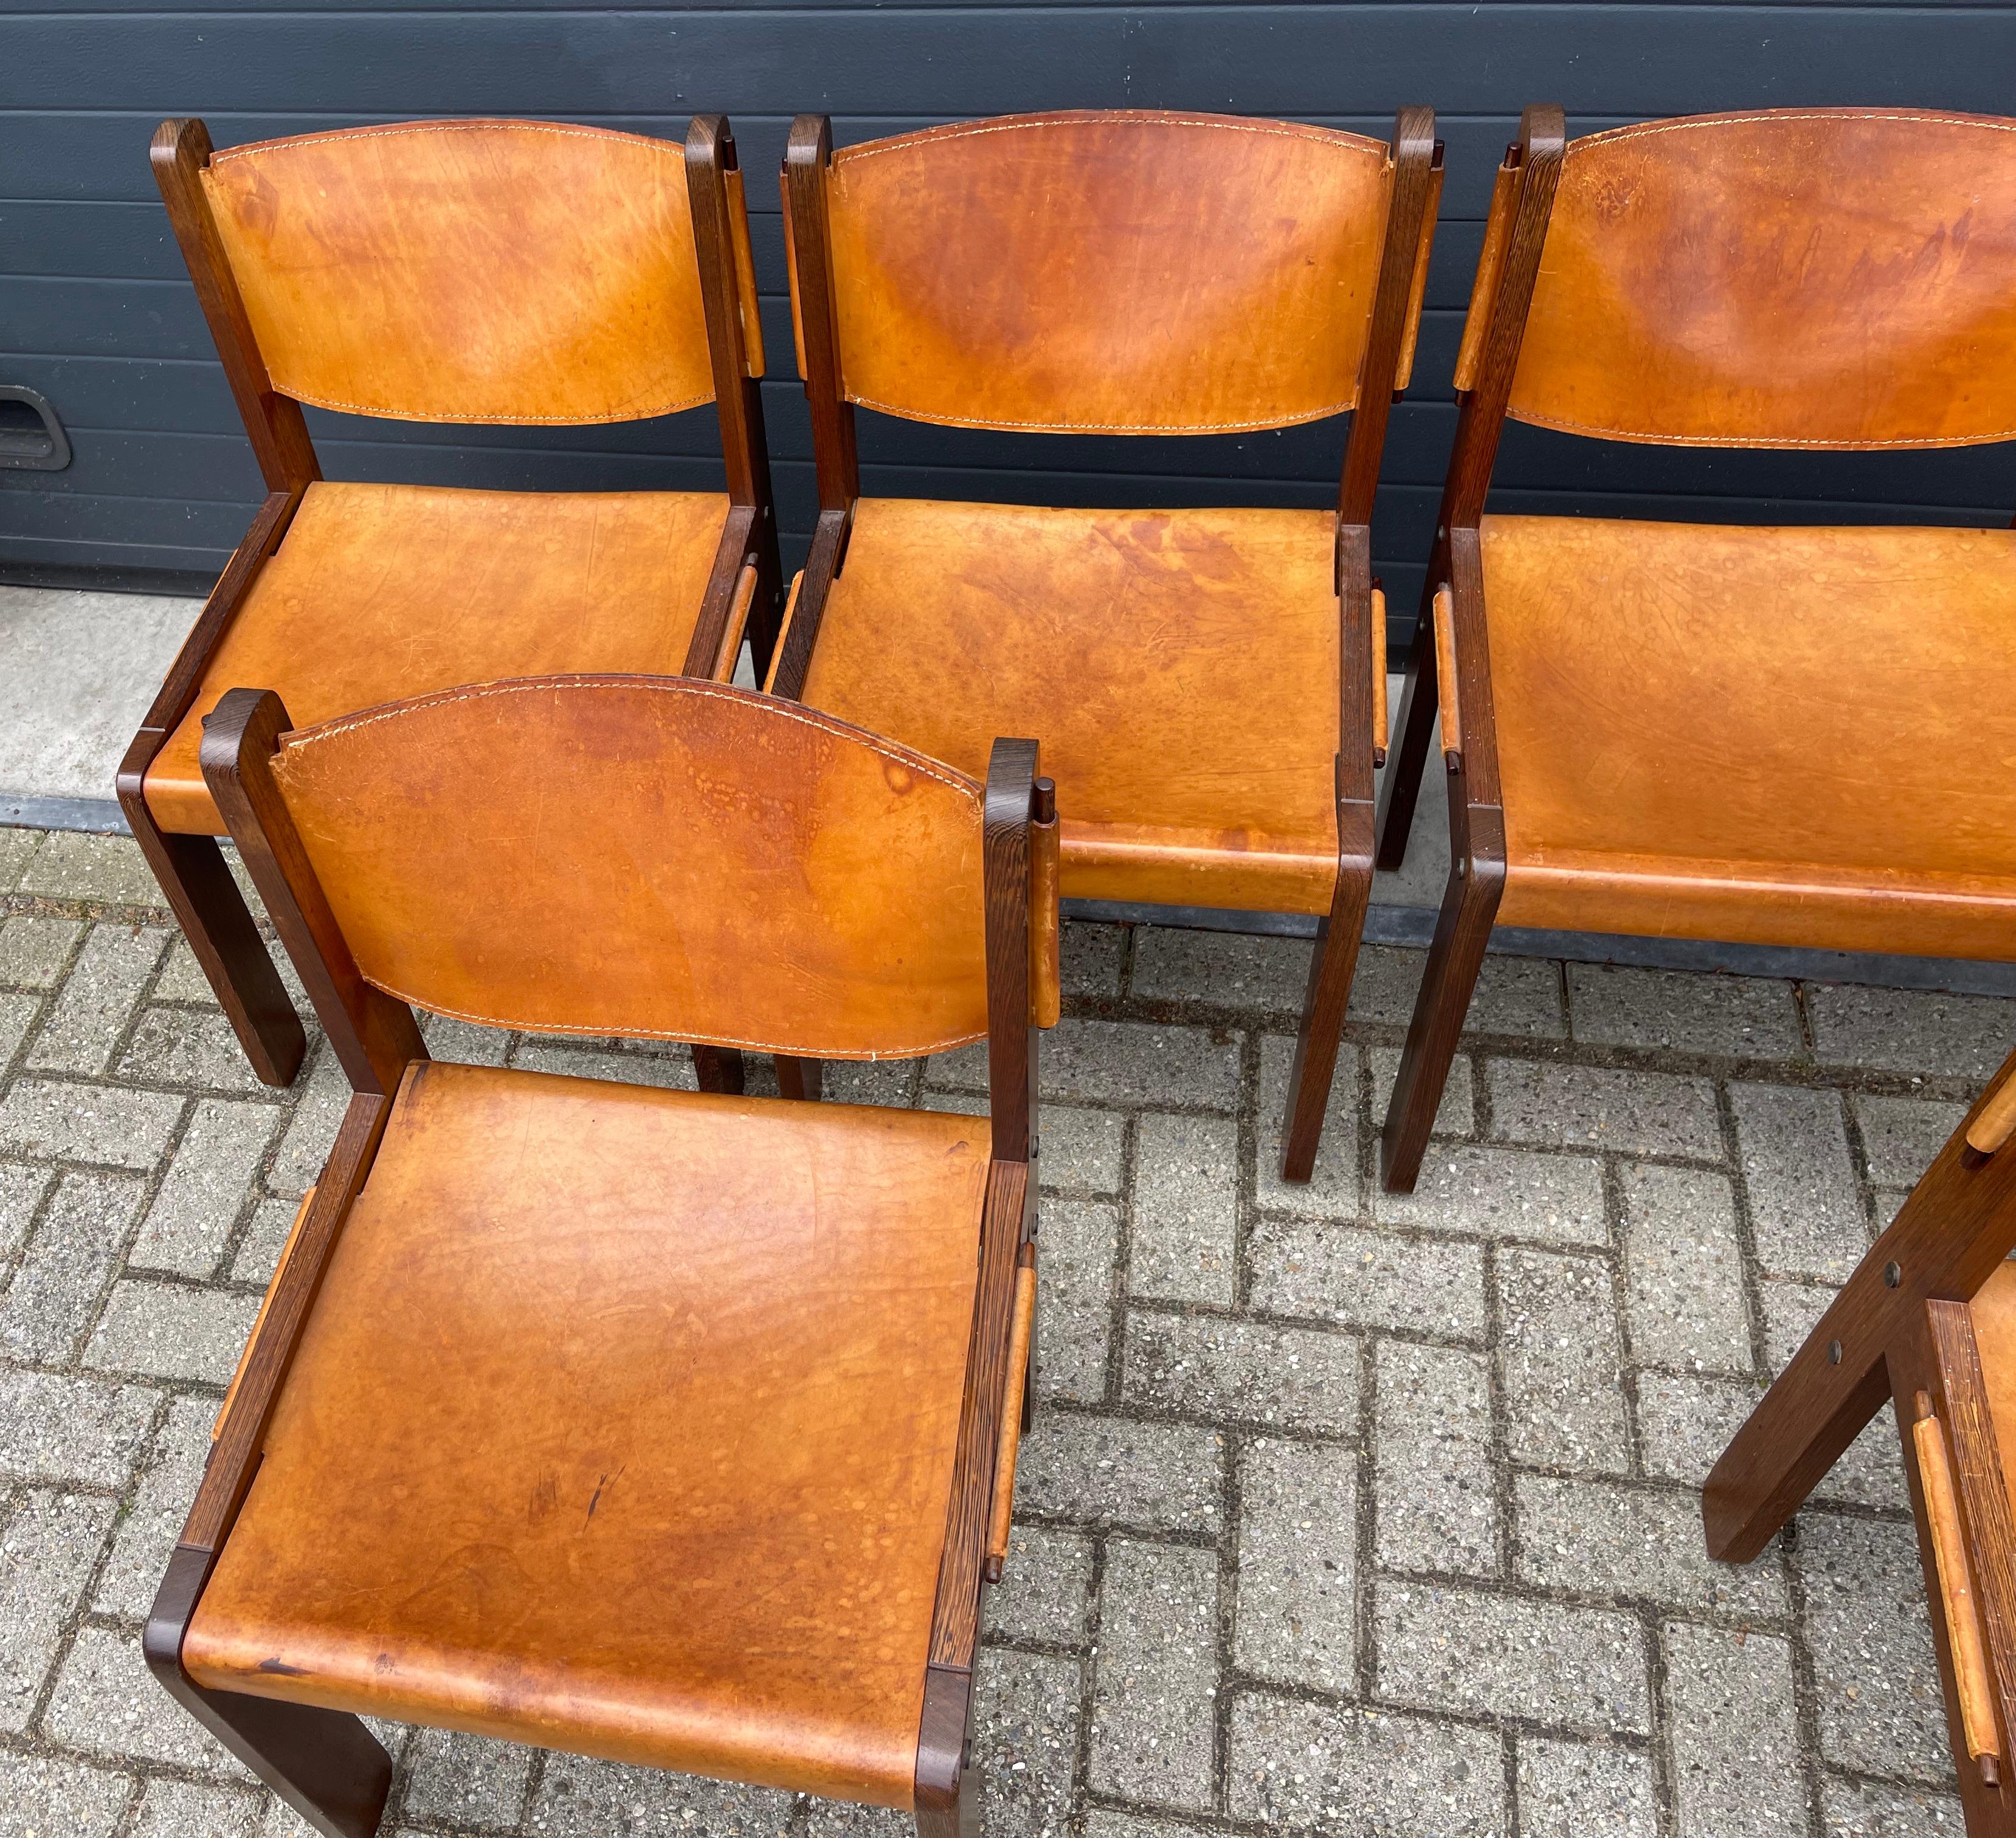 Hand-Crafted Stunning Midcentury Modern Wengé & Leather Dining Table Set with 6 Chairs, 1970s